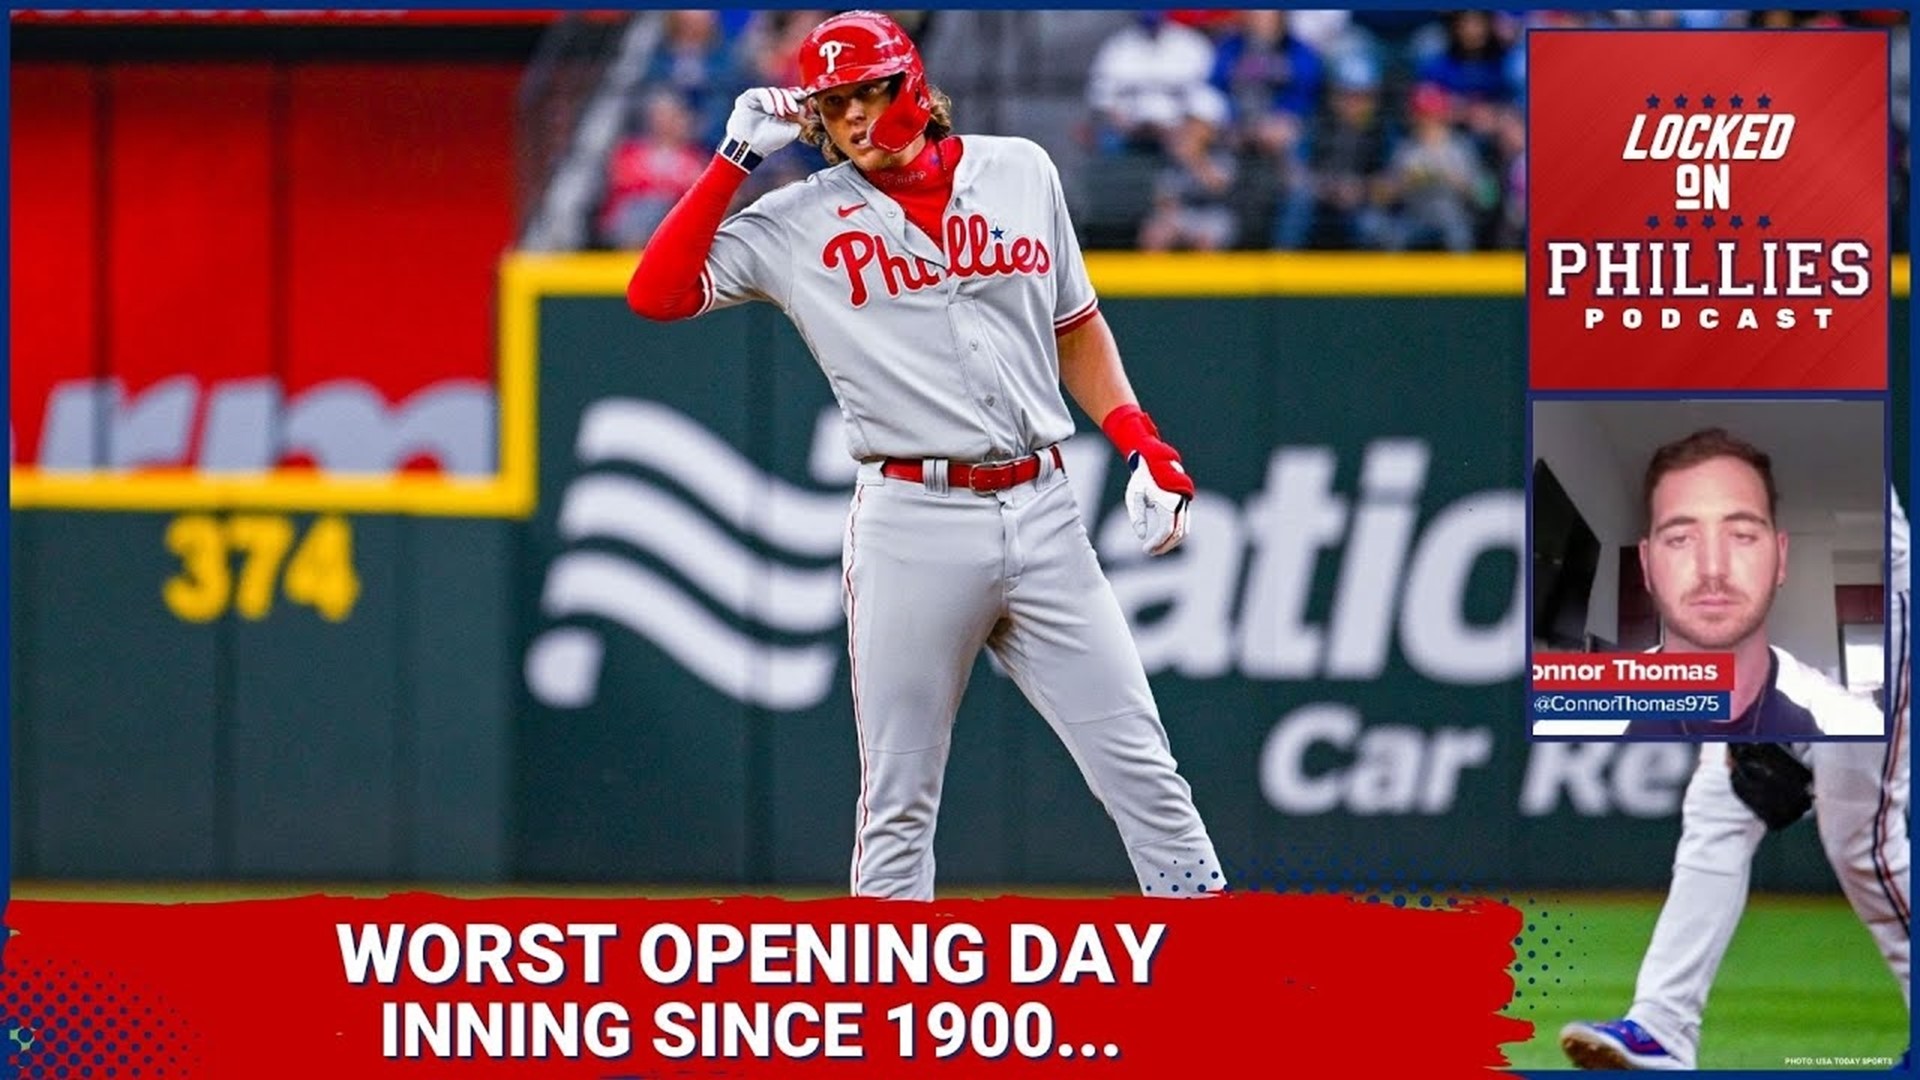 In today's episode, Connor breaks down the Philadelphia Phillies' opening day loss to the Texas Rangers following a 9 run 4th inning.